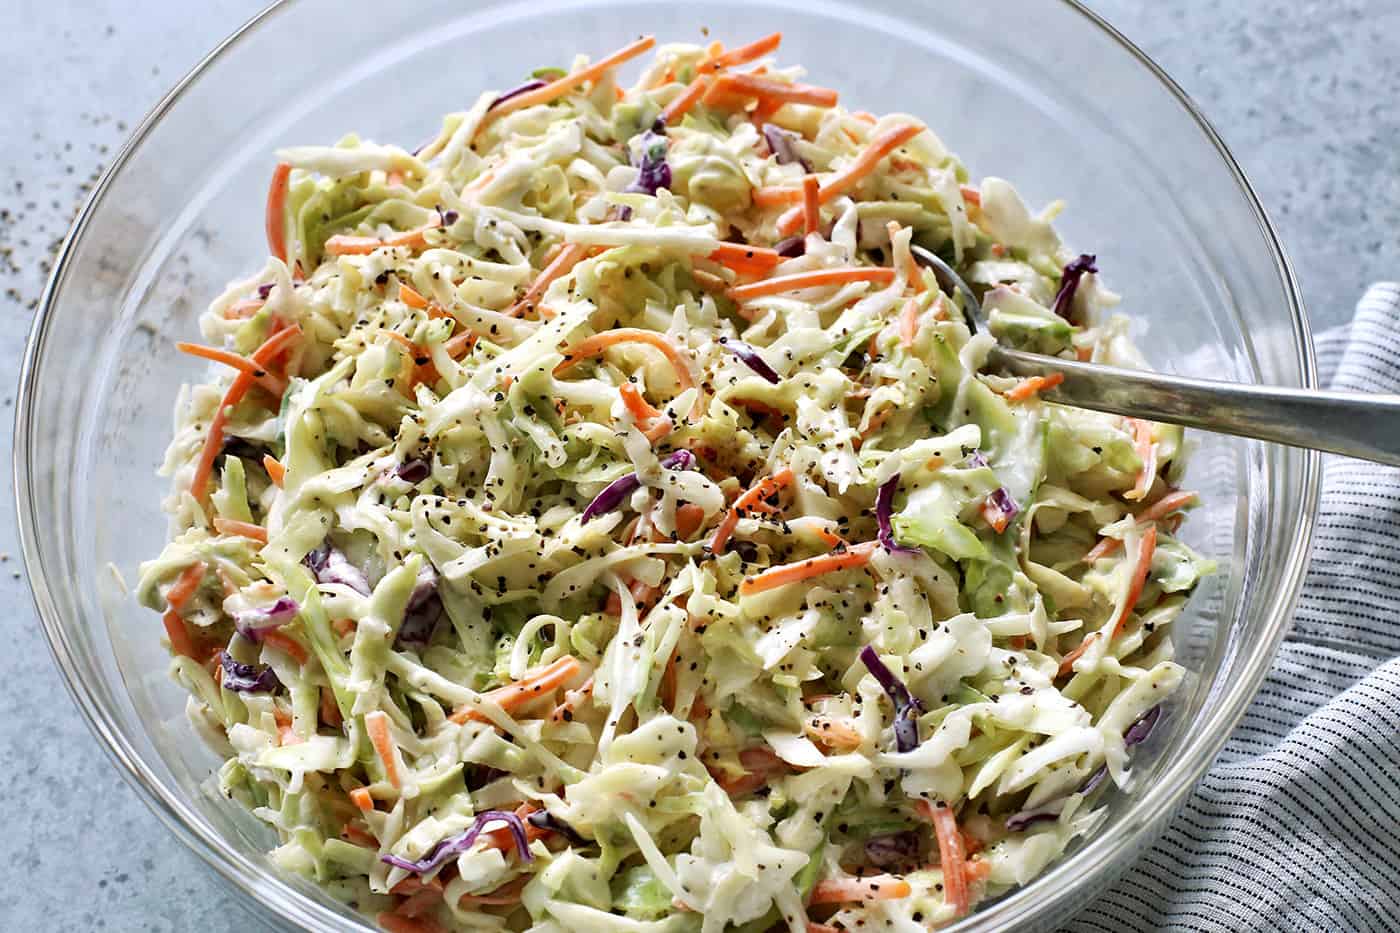 a clear bowl of coleslaw salad